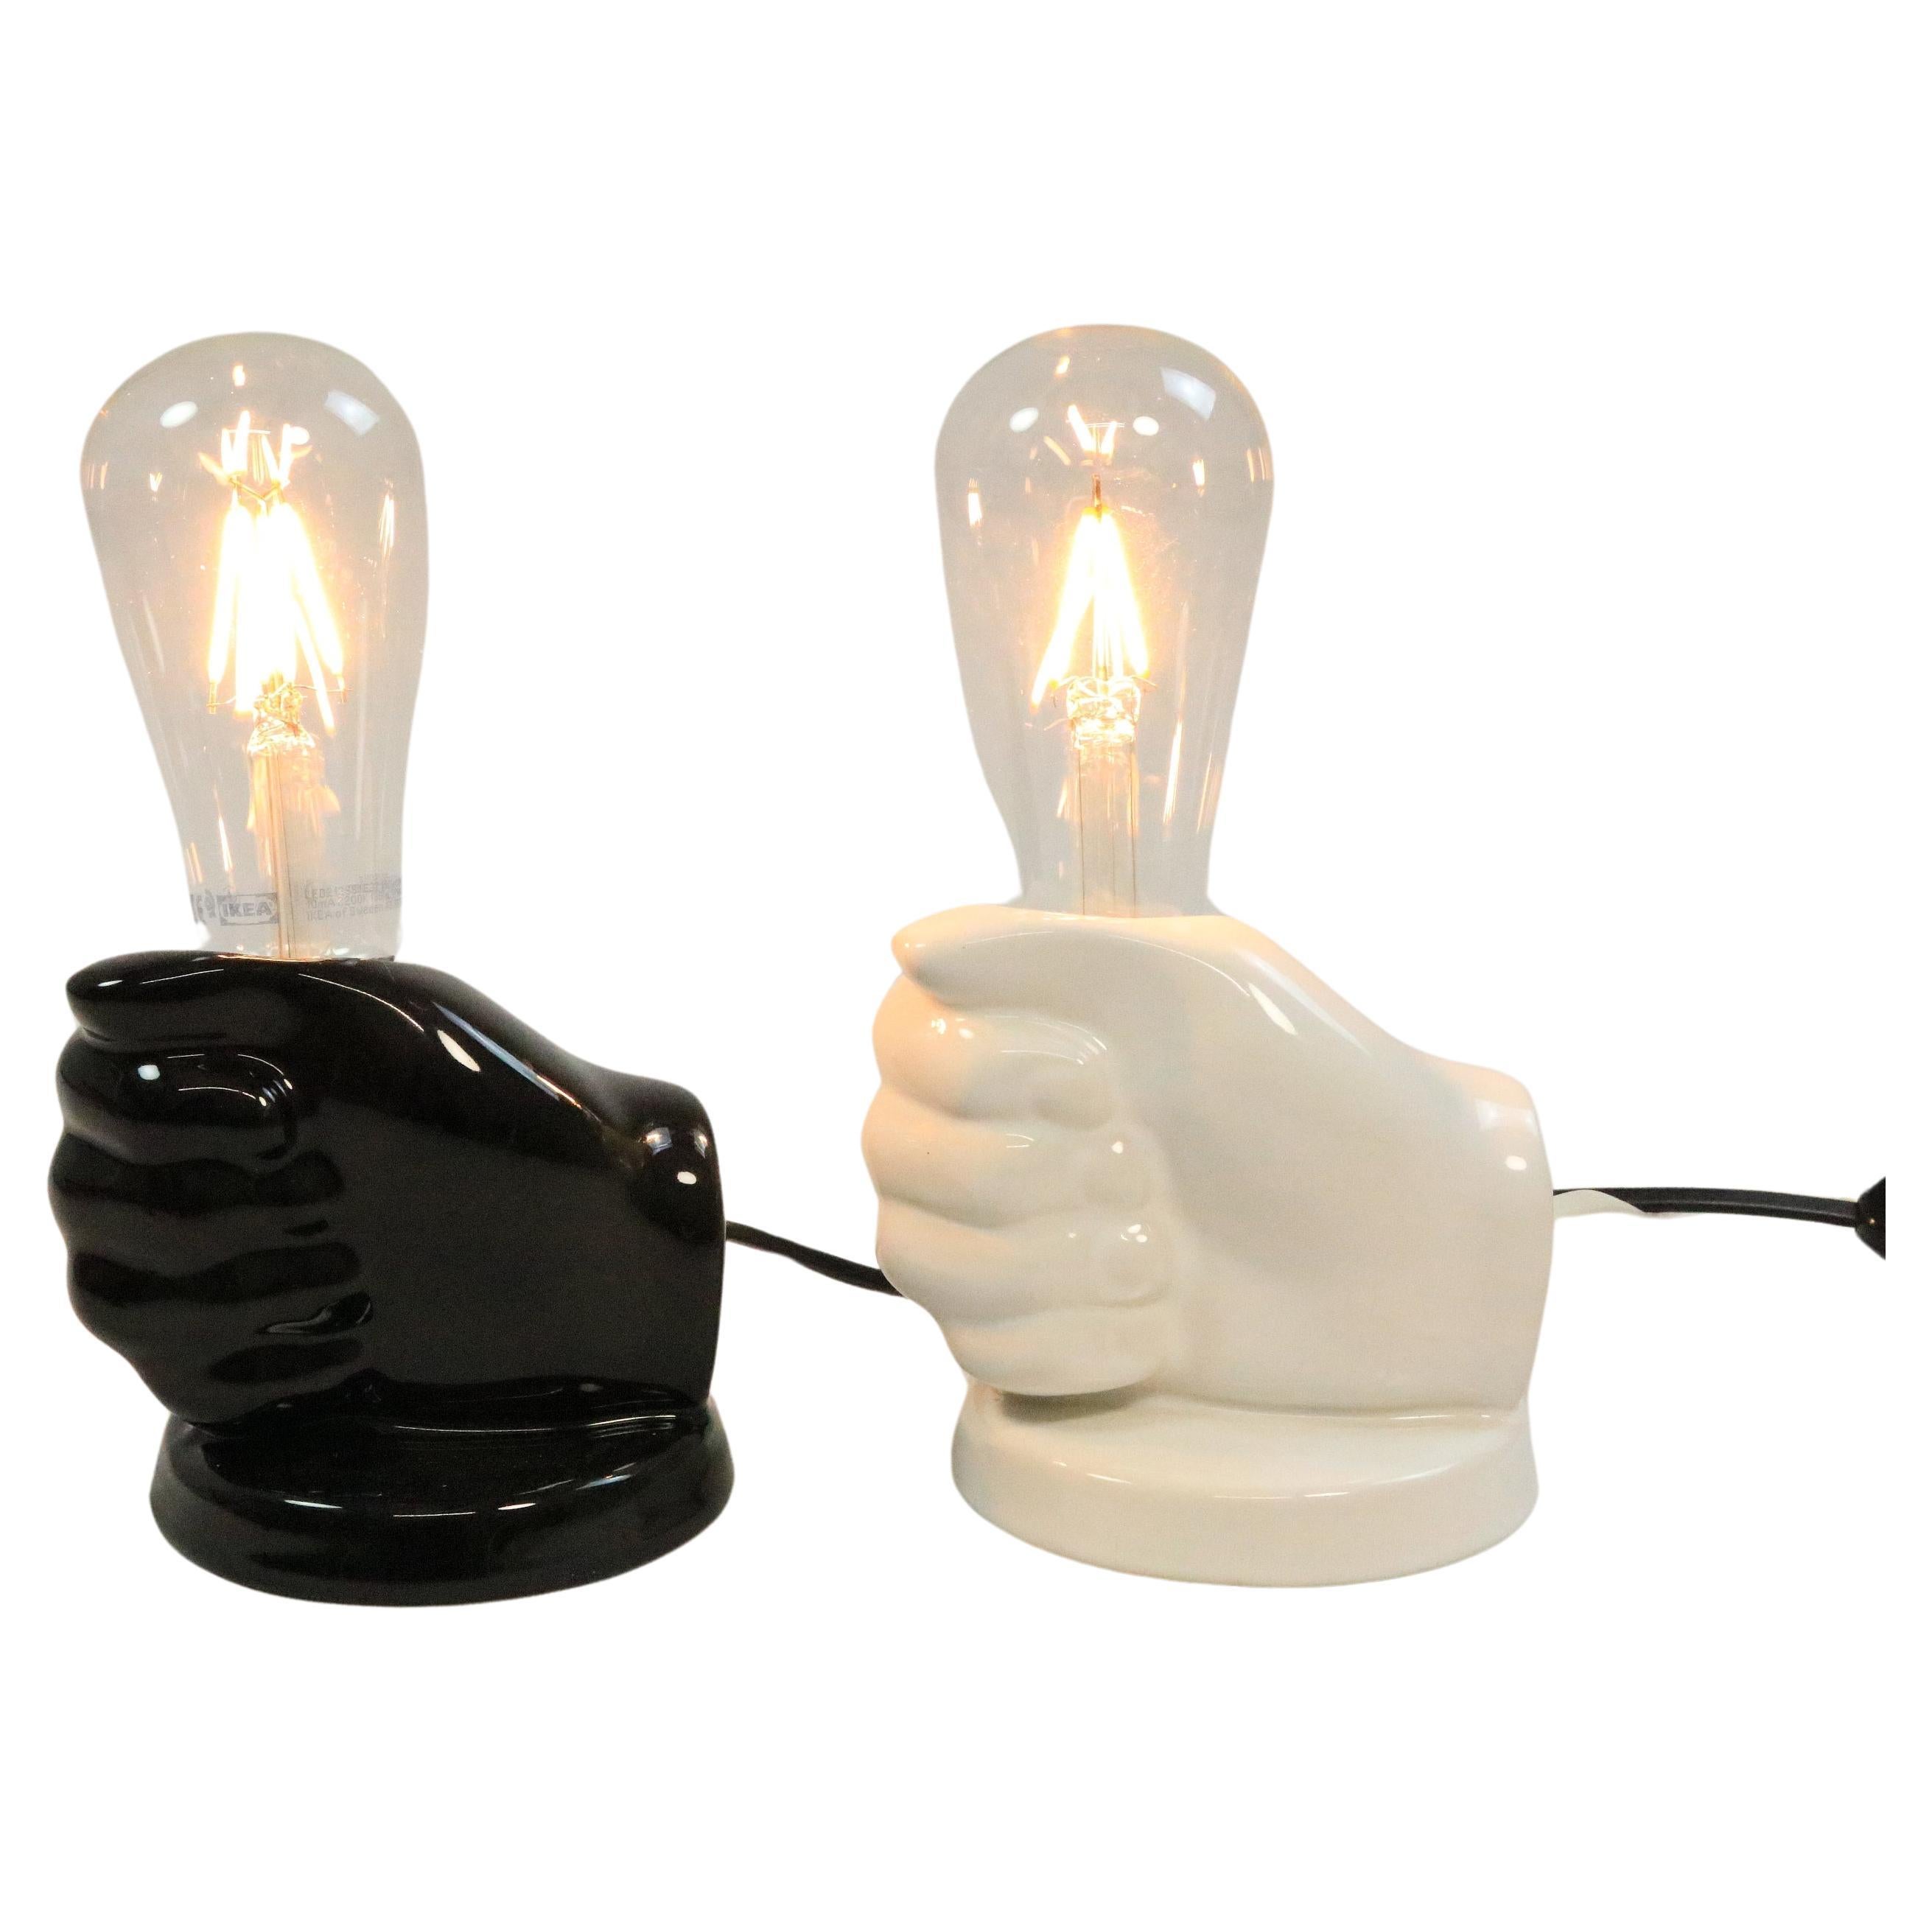 2 x Small Pottery Table Lamp, Hand, Black / White, 1980s, by Aro Germany For Sale